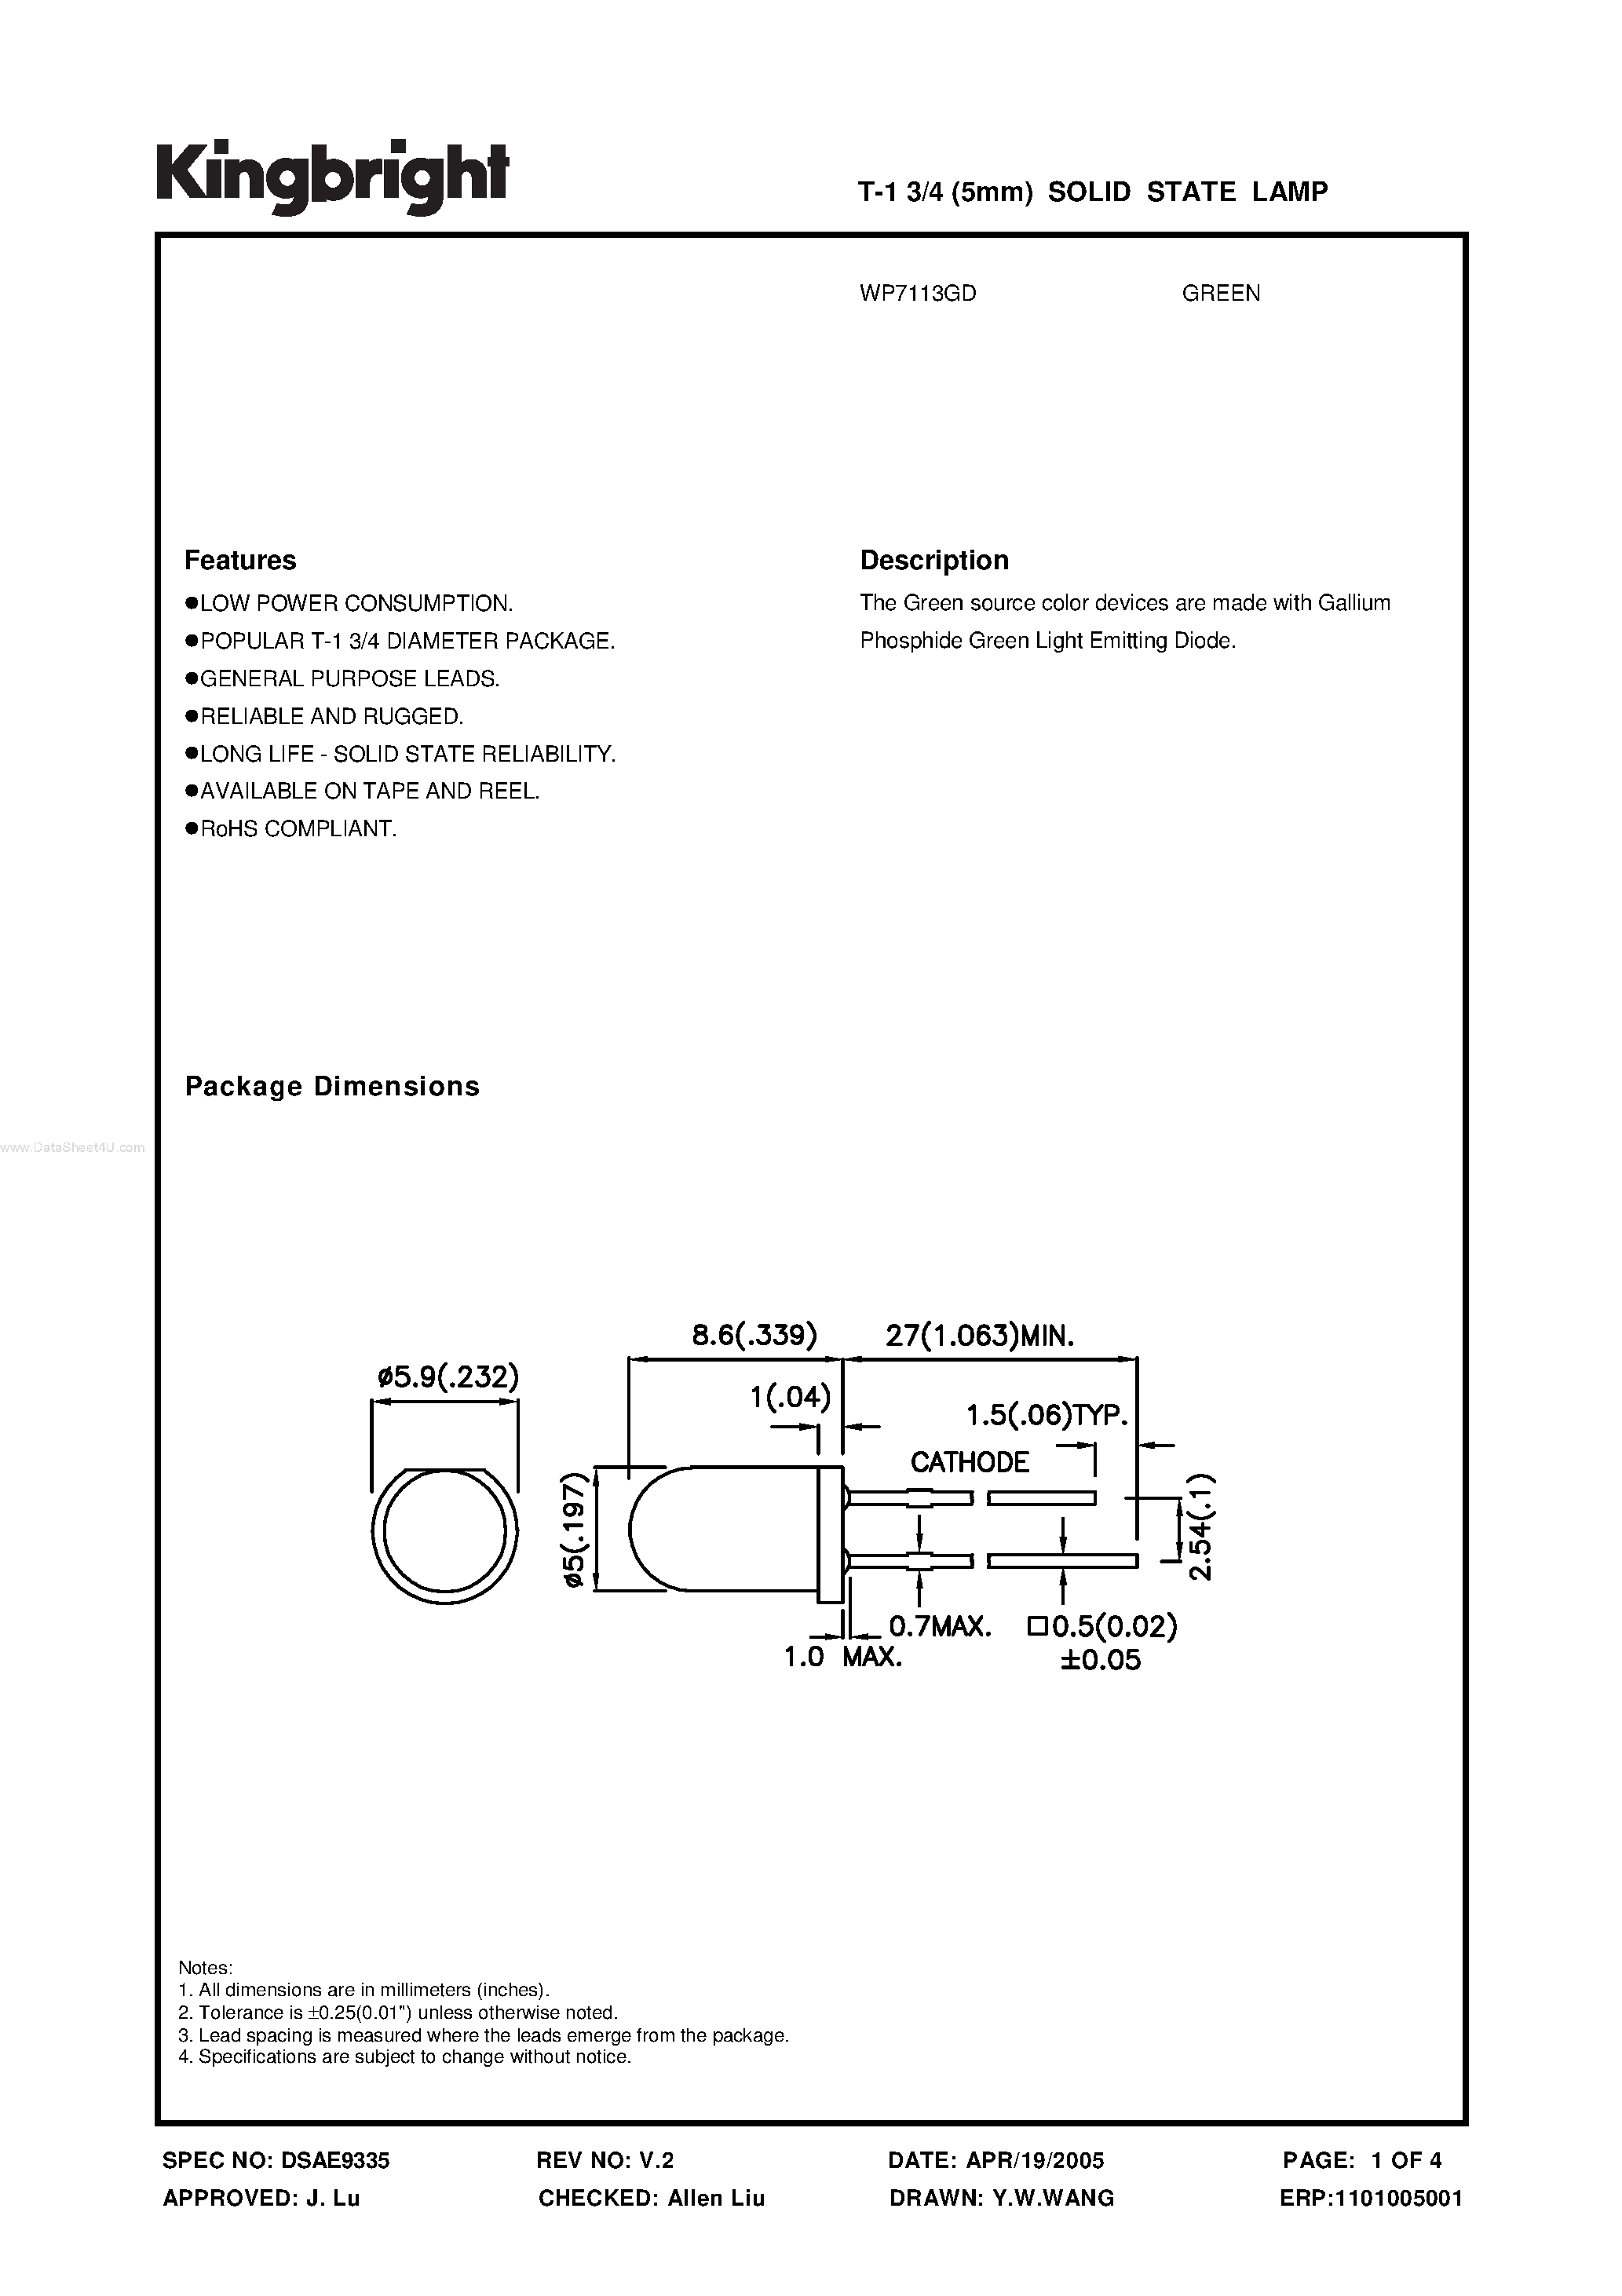 Datasheet WP7113GD - SOLID STATE LAMP page 1